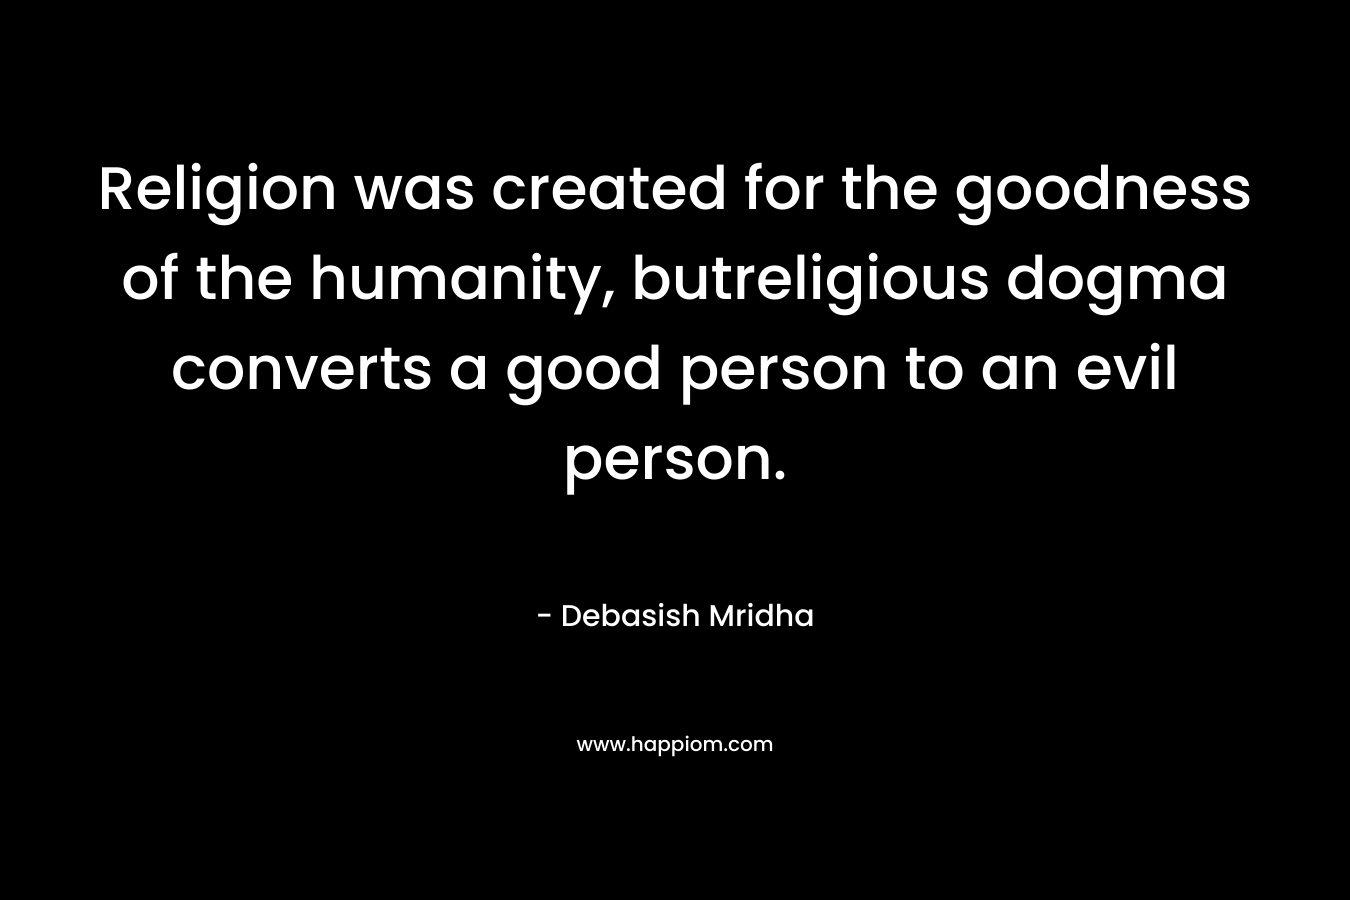 Religion was created for the goodness of the humanity, butreligious dogma converts a good person to an evil person. – Debasish Mridha